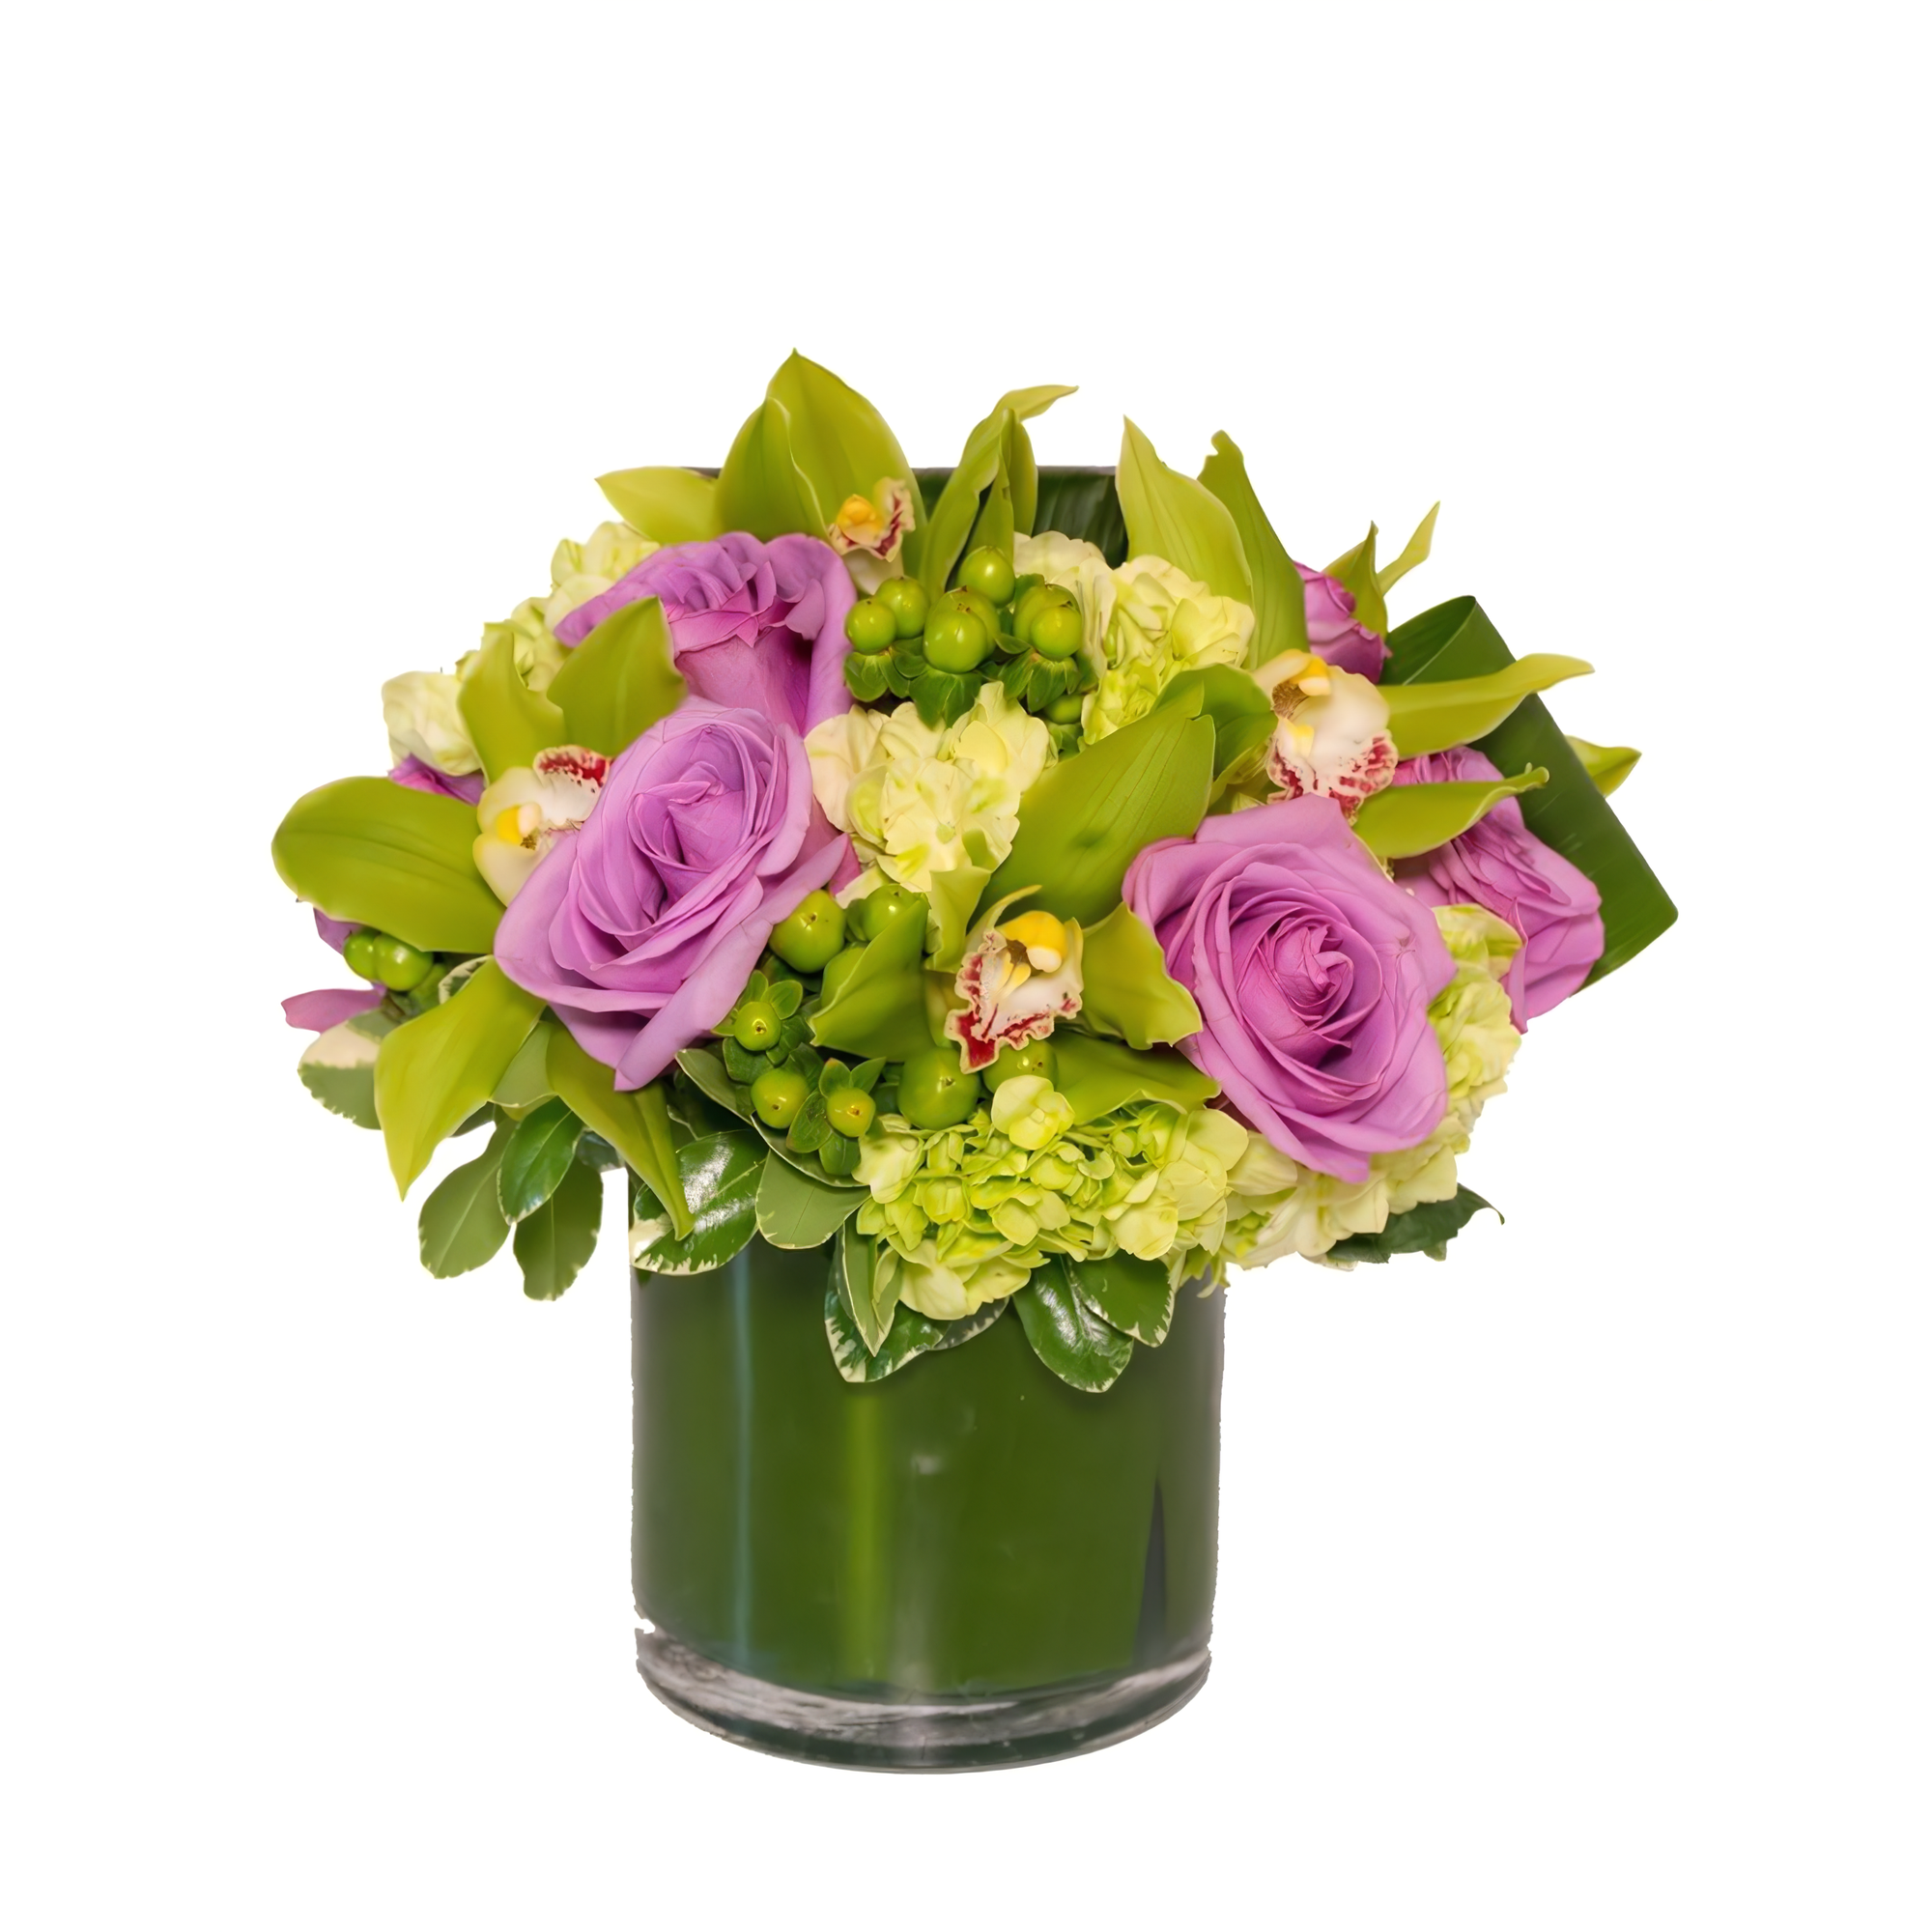 Manhattan Flower Delivery - The Very Thought of You - Birthdays